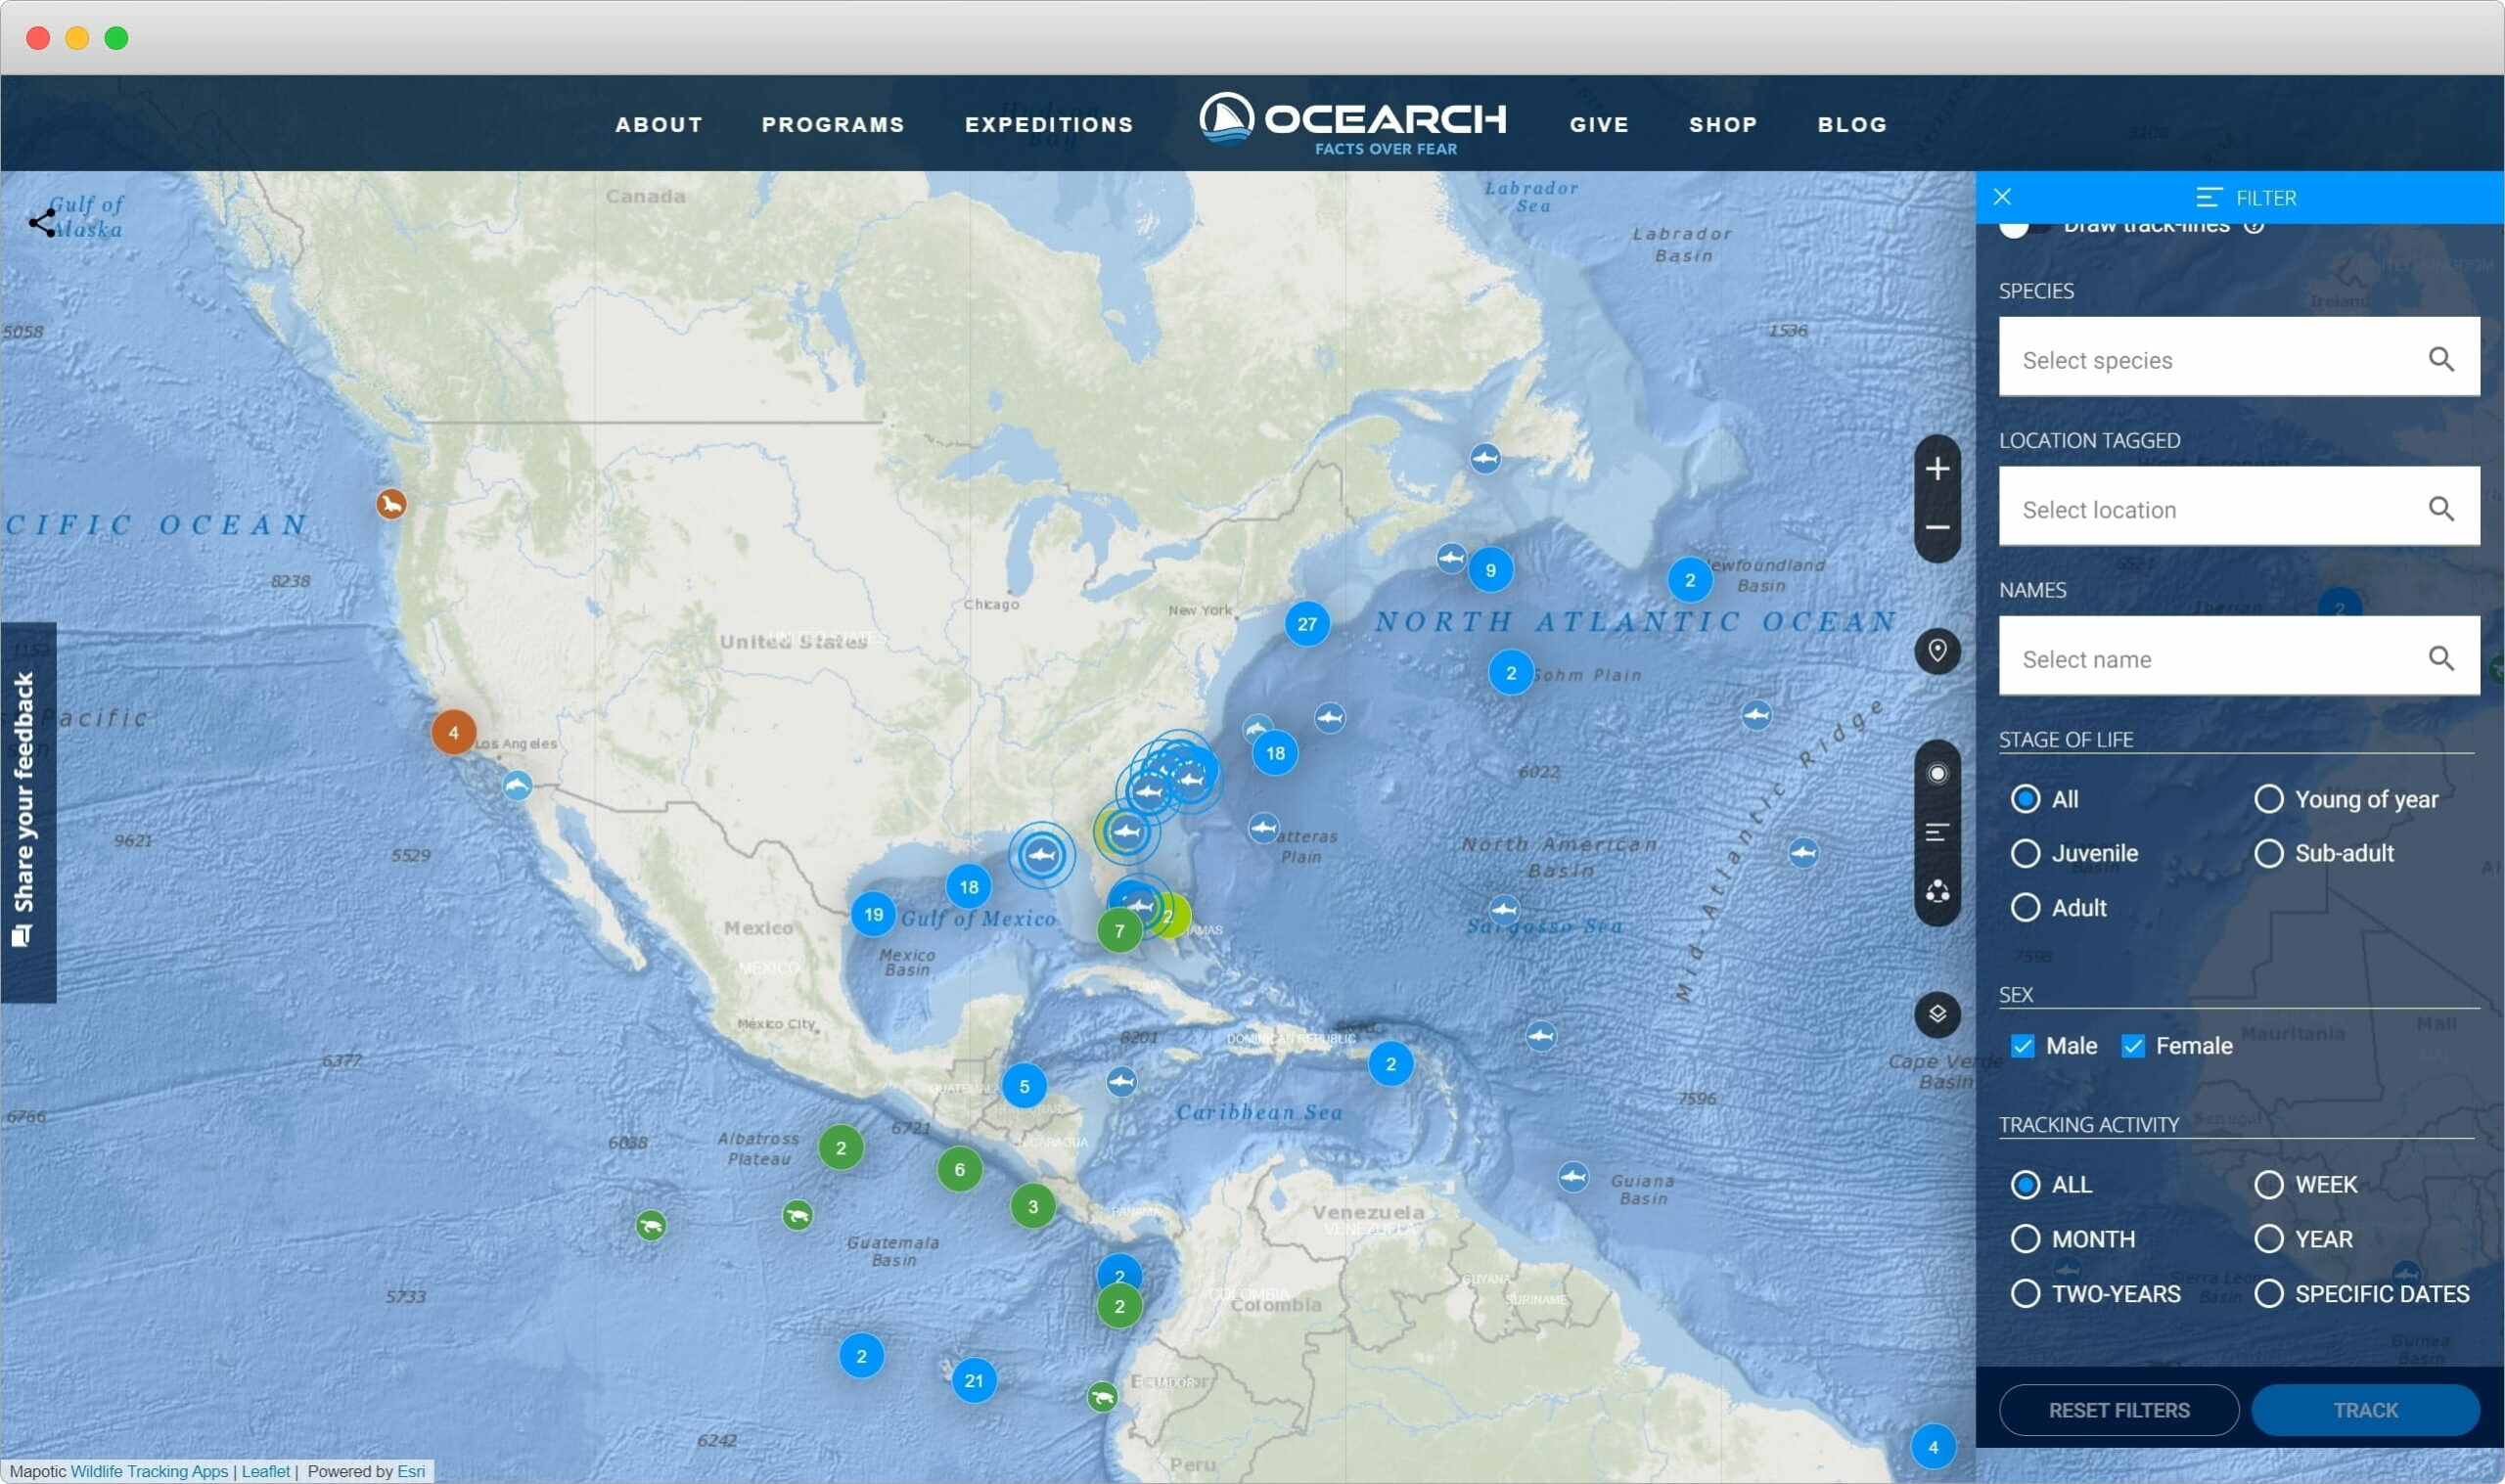 Filtering options in the OCEARCH tracker